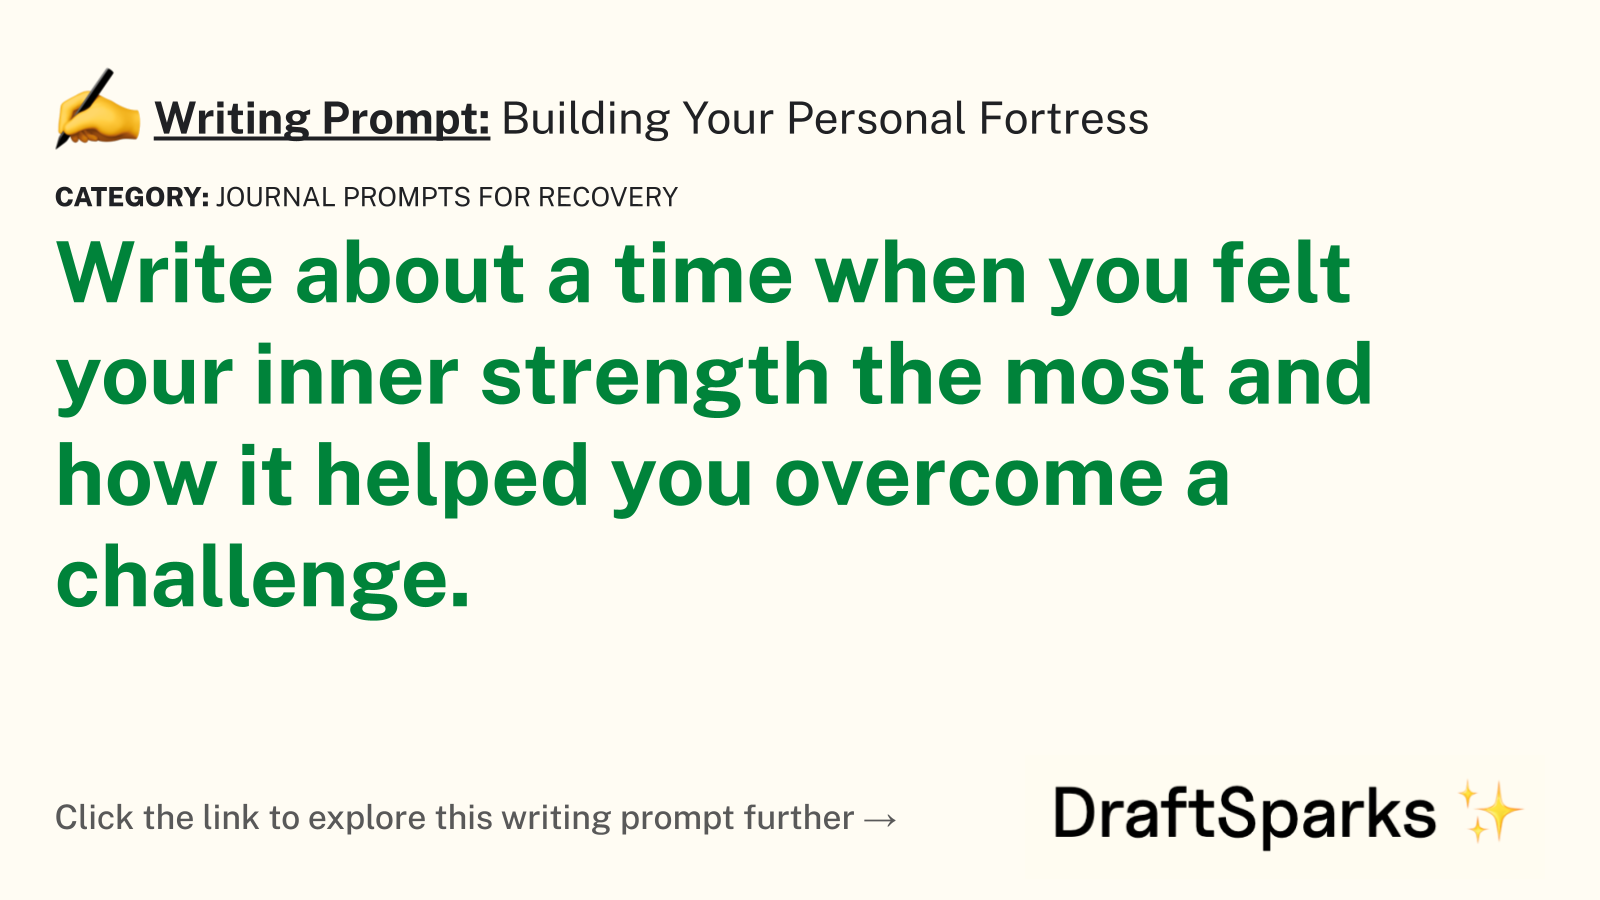 Building Your Personal Fortress